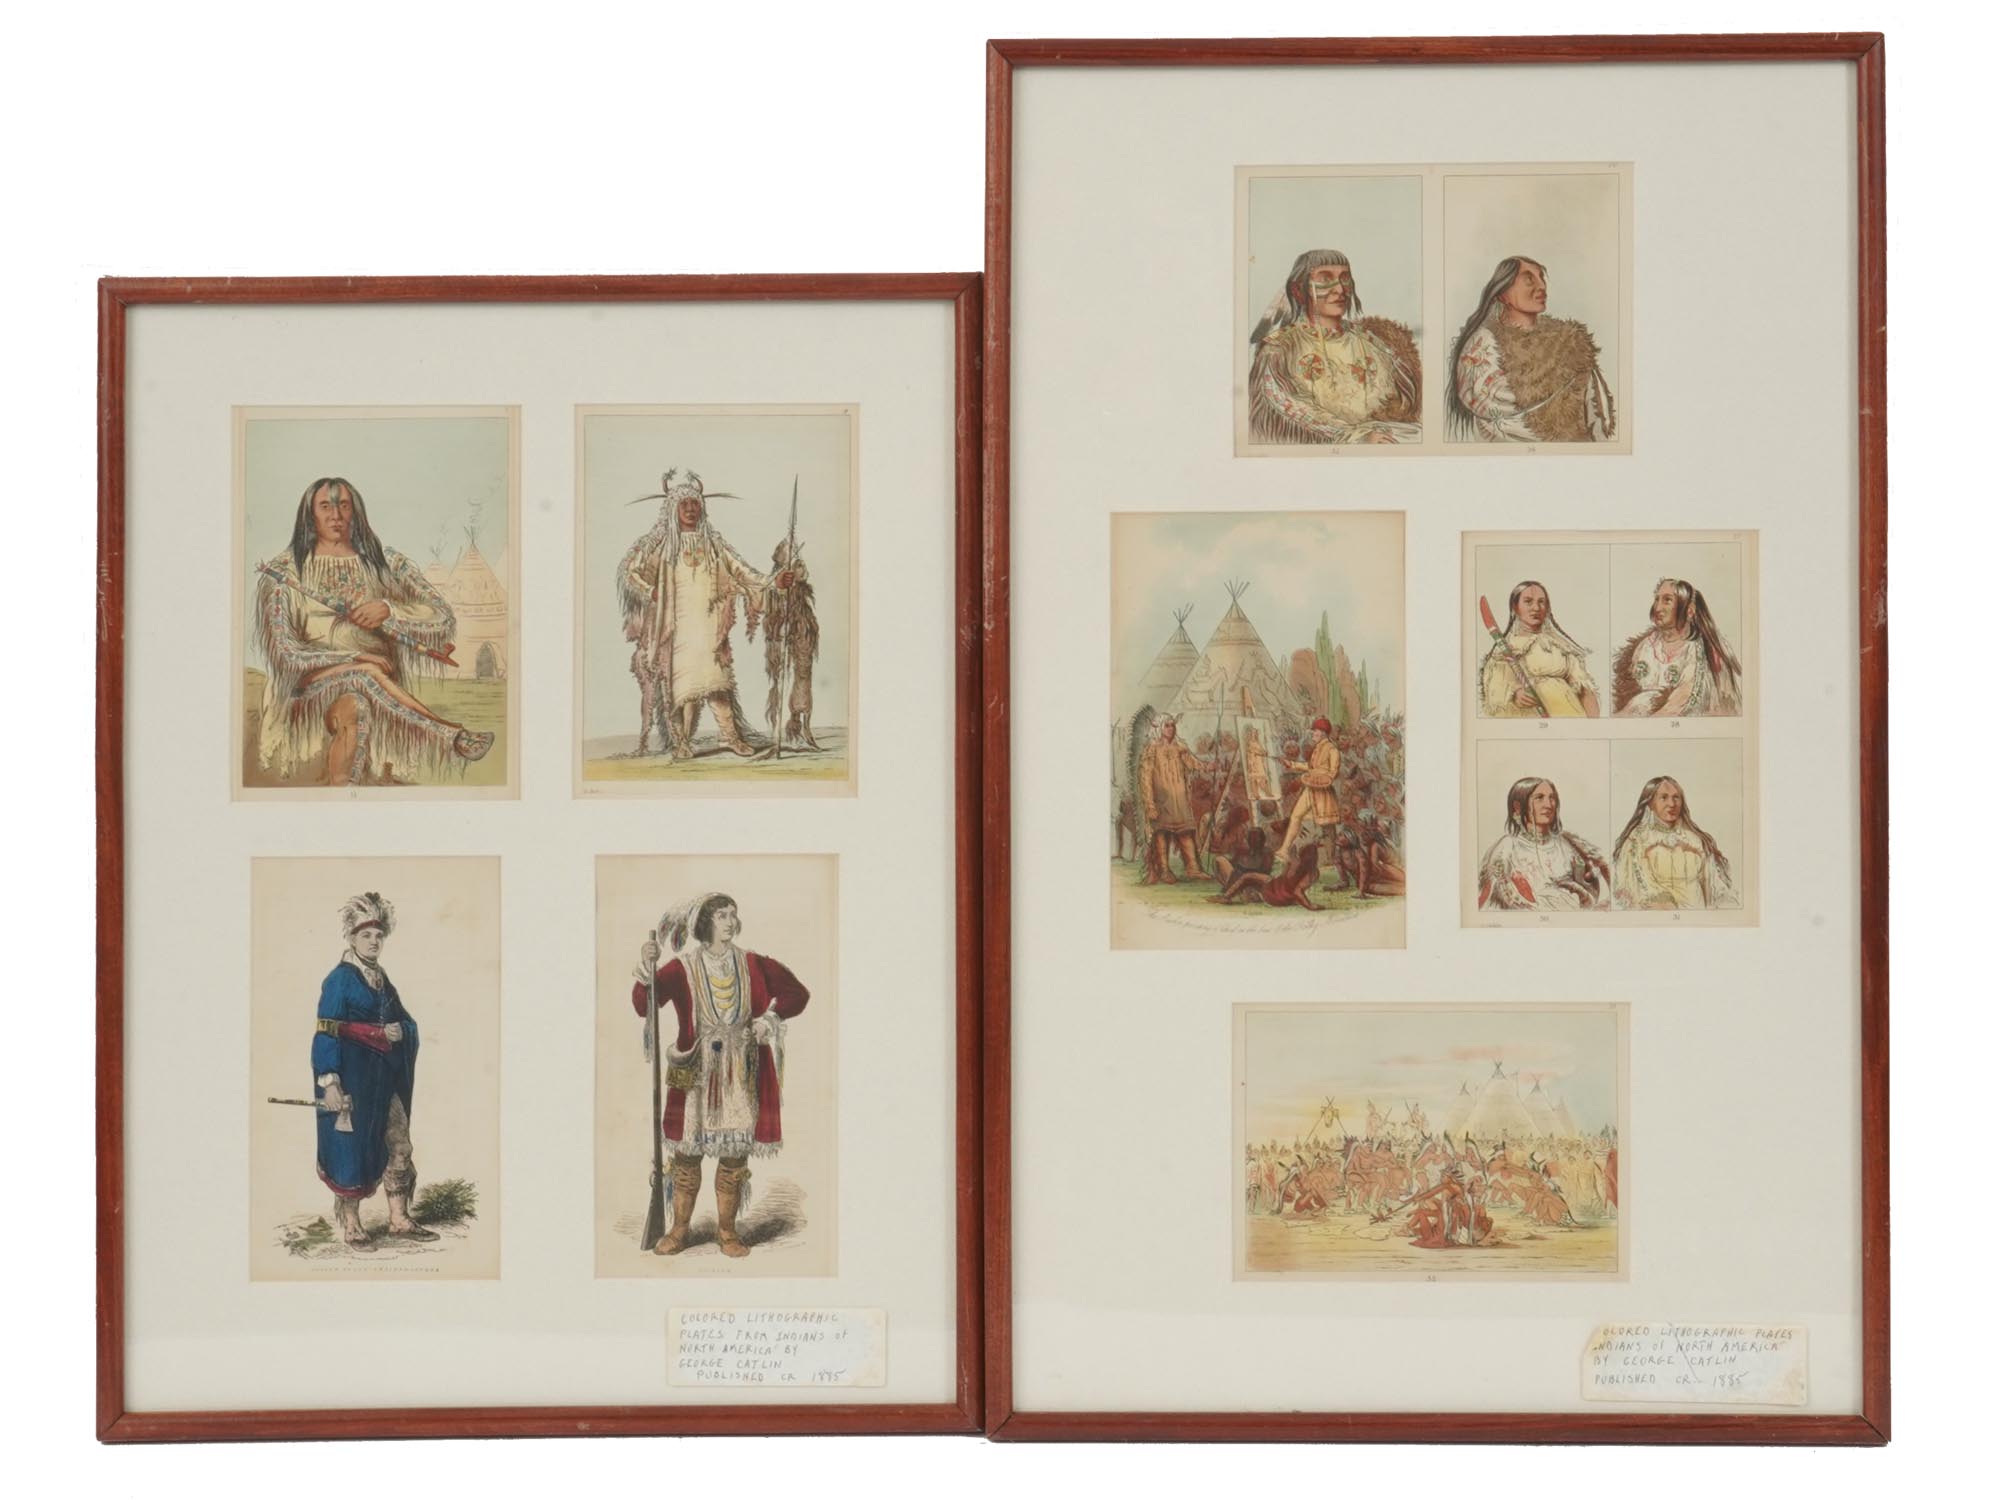 ANTIQUE PRINTS NATIVE AMERICANS BY GEORGE CATLIN